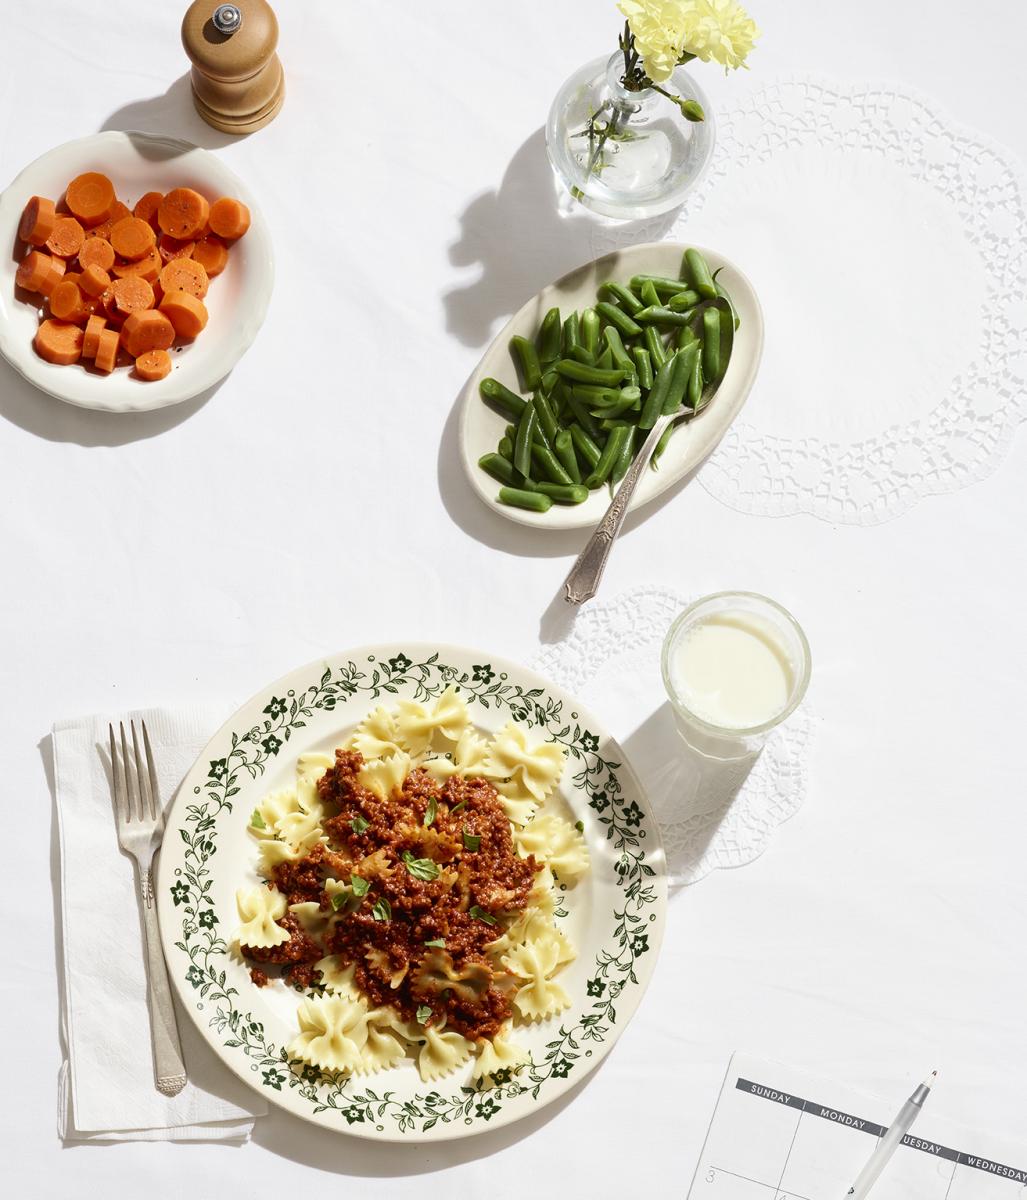 From Our Kitchen to Yours: Bowtie Pasta with Bolognese